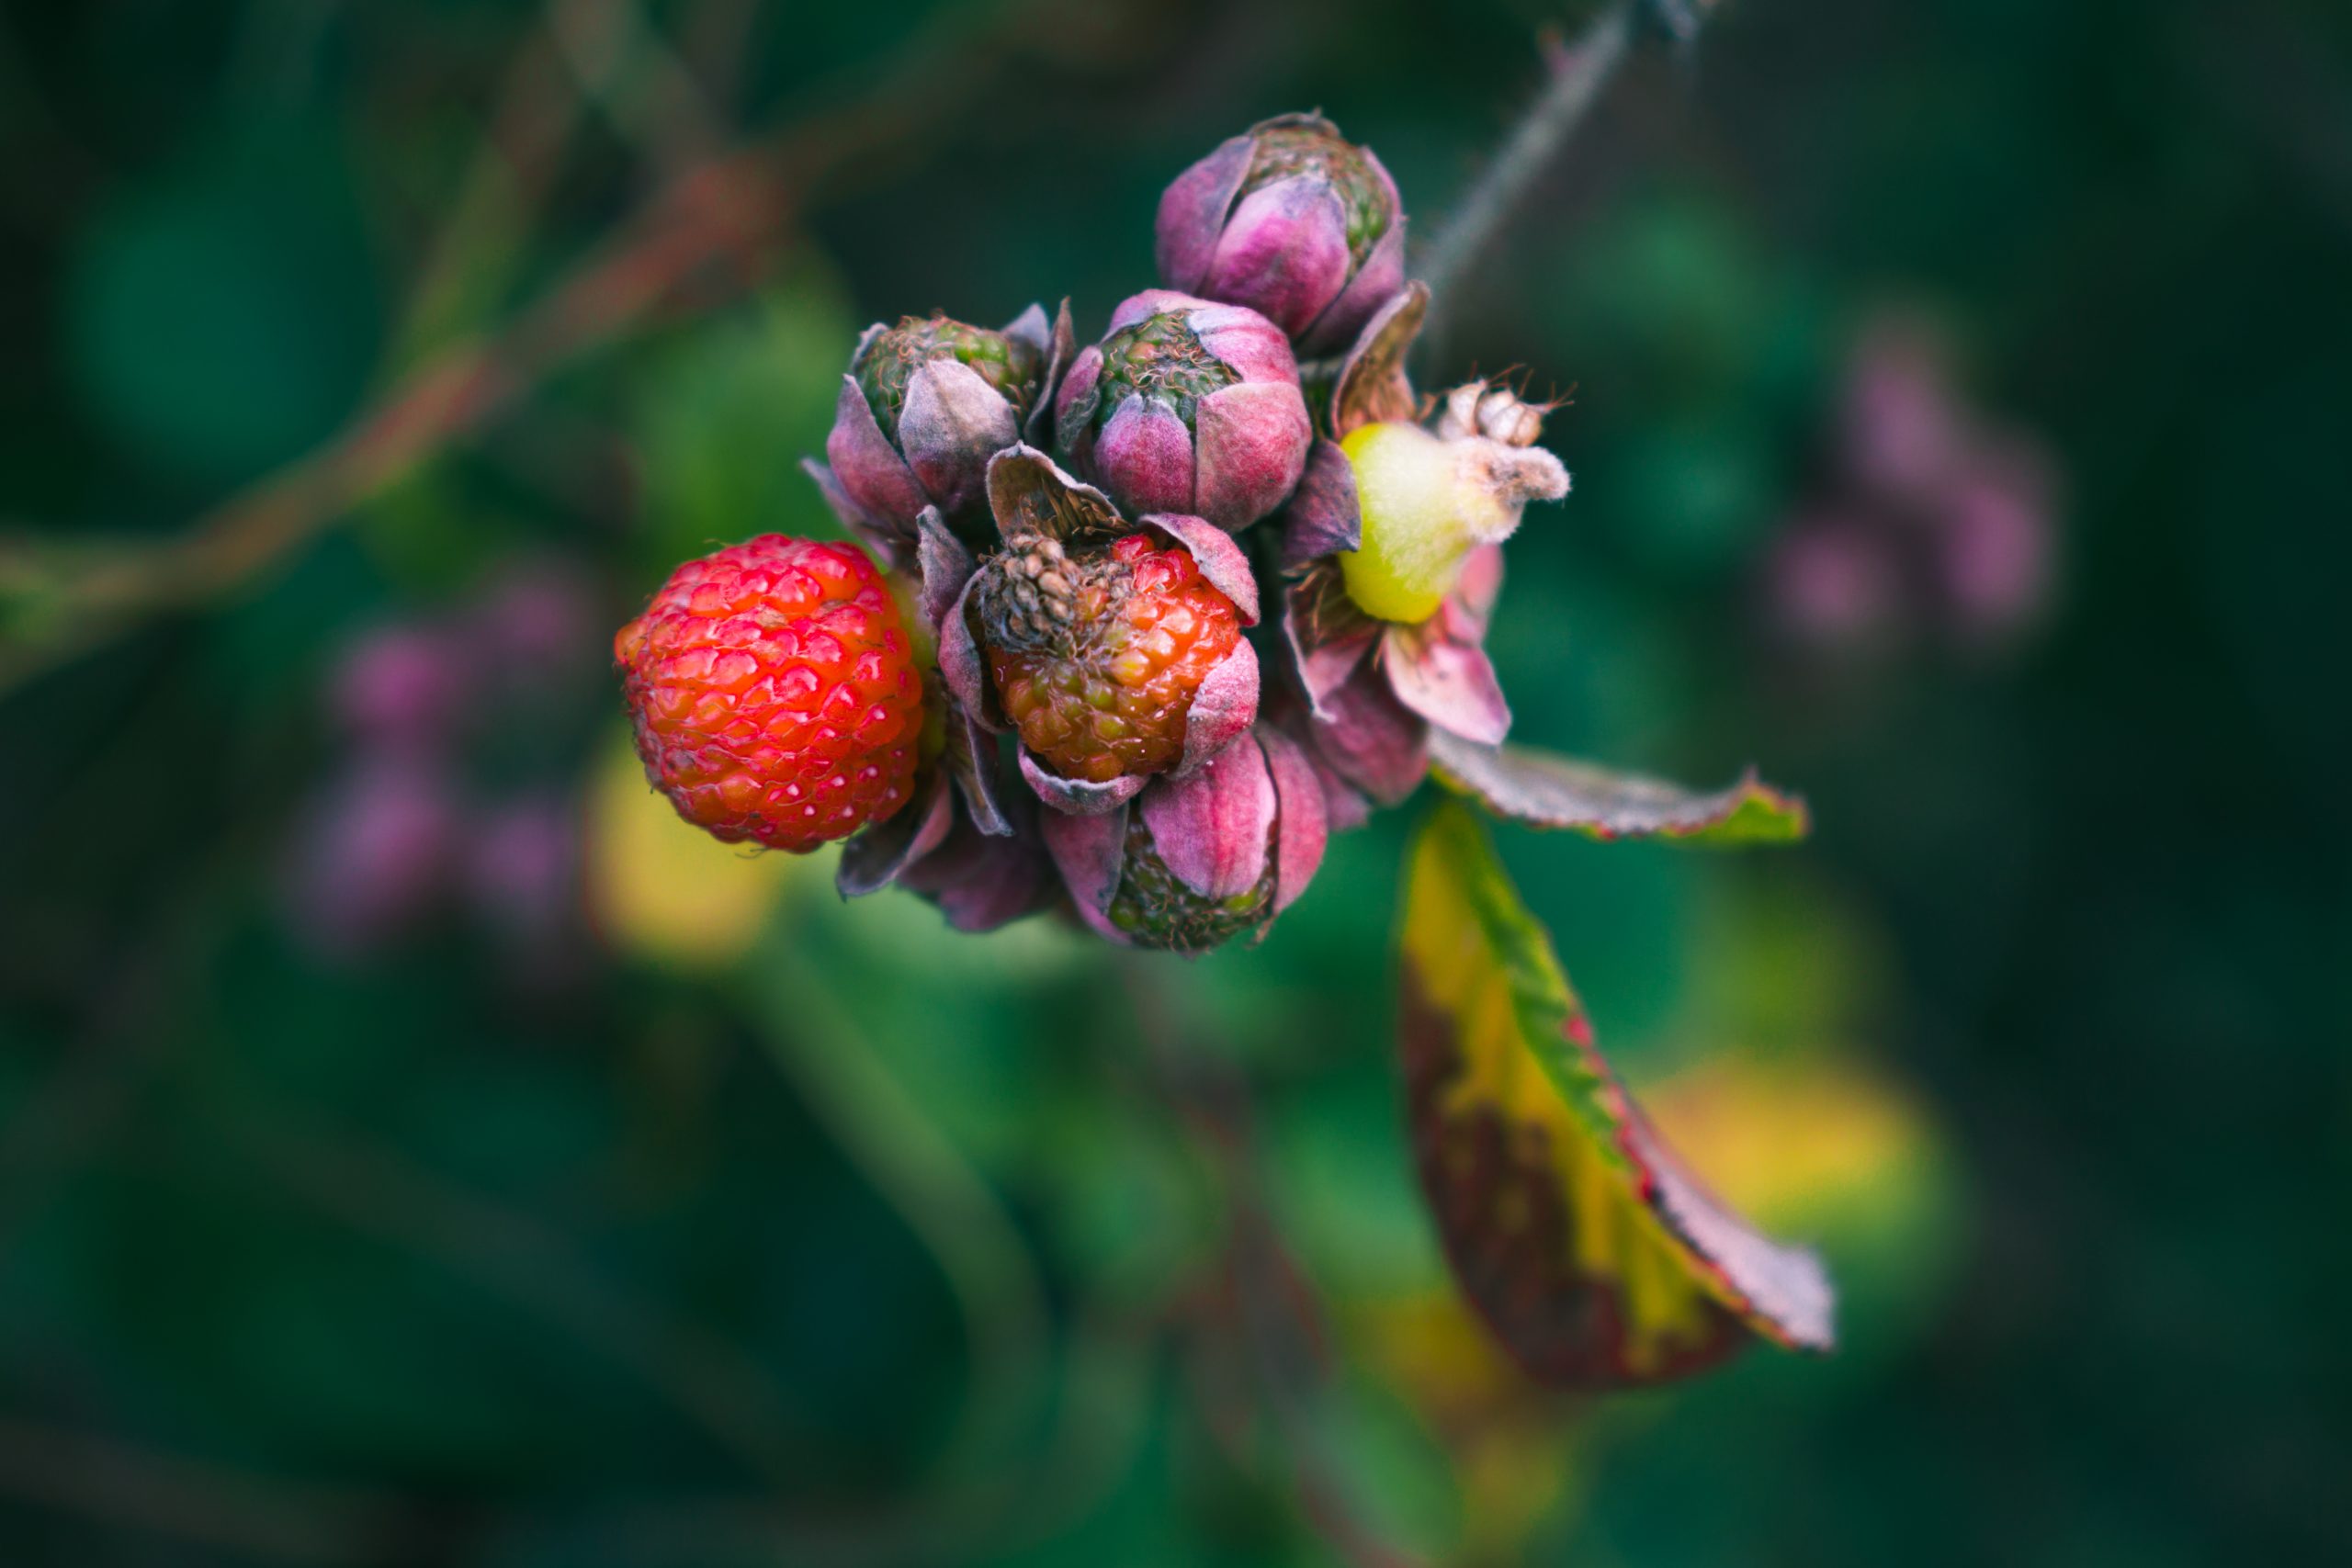 Berries of a plant